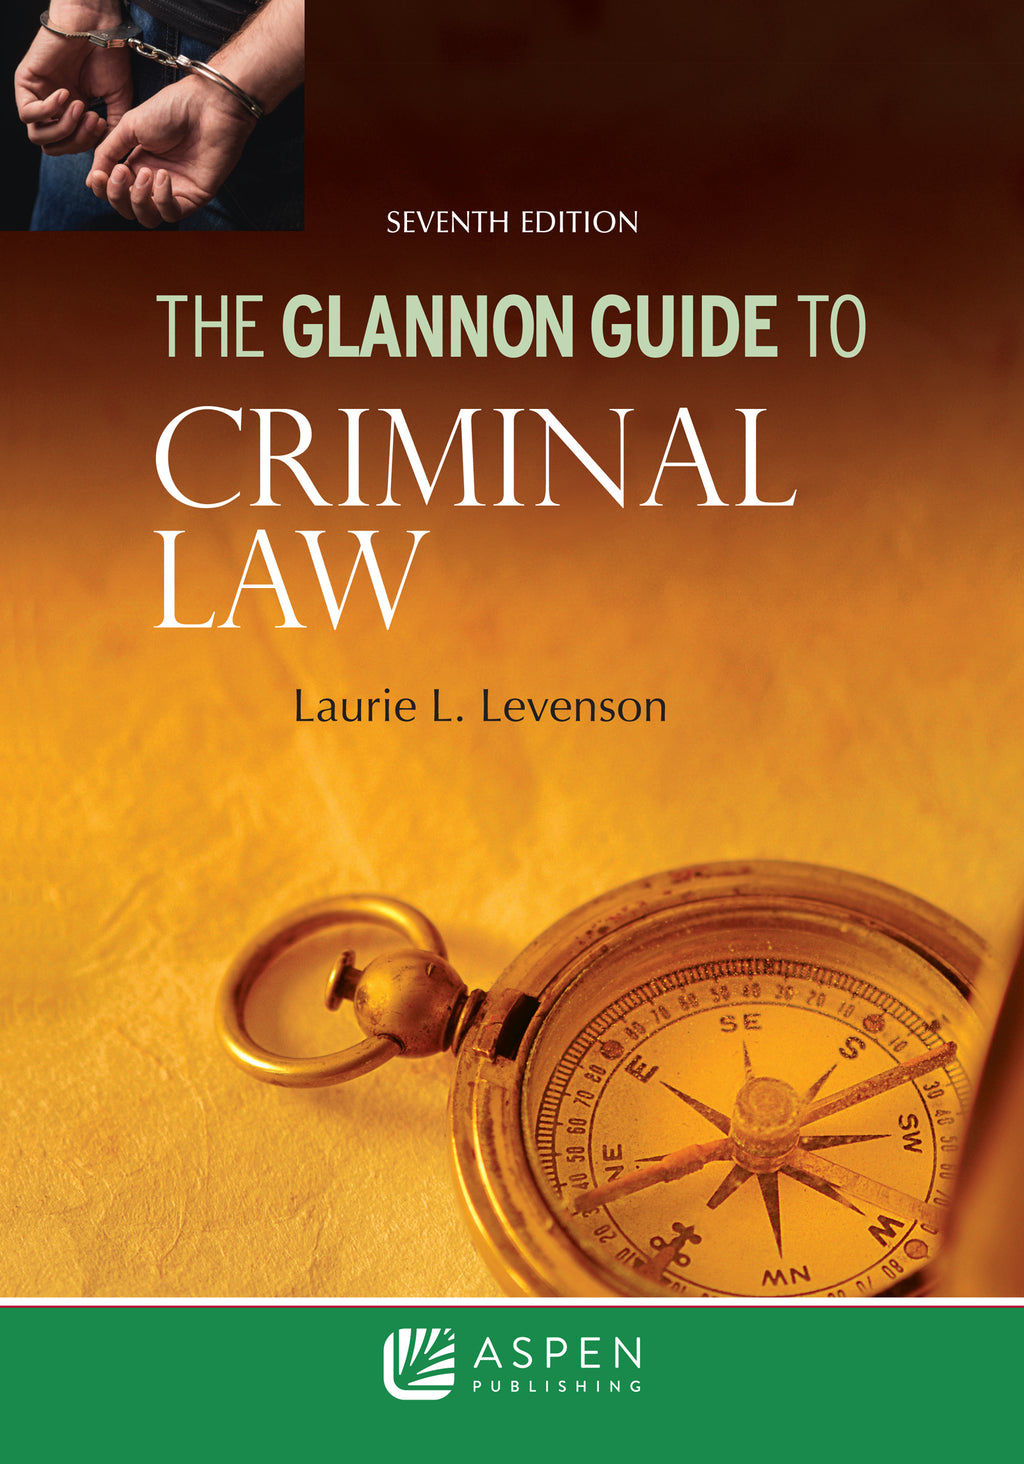 NEW低価Criminal Laws 7th Edition 洋書